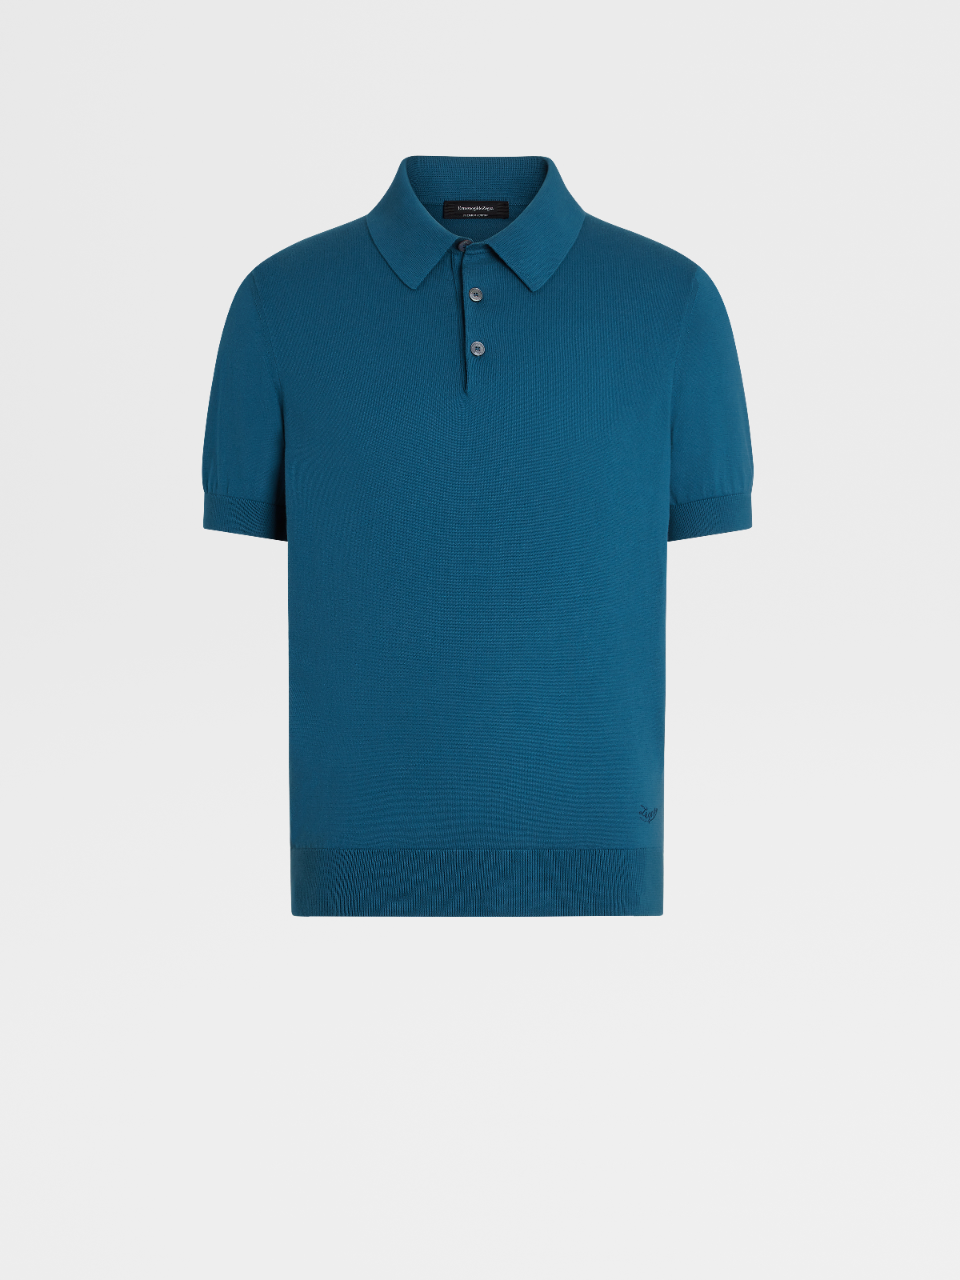 Bright Teal Blue Premium Cotton Knit Short-sleeve Polo